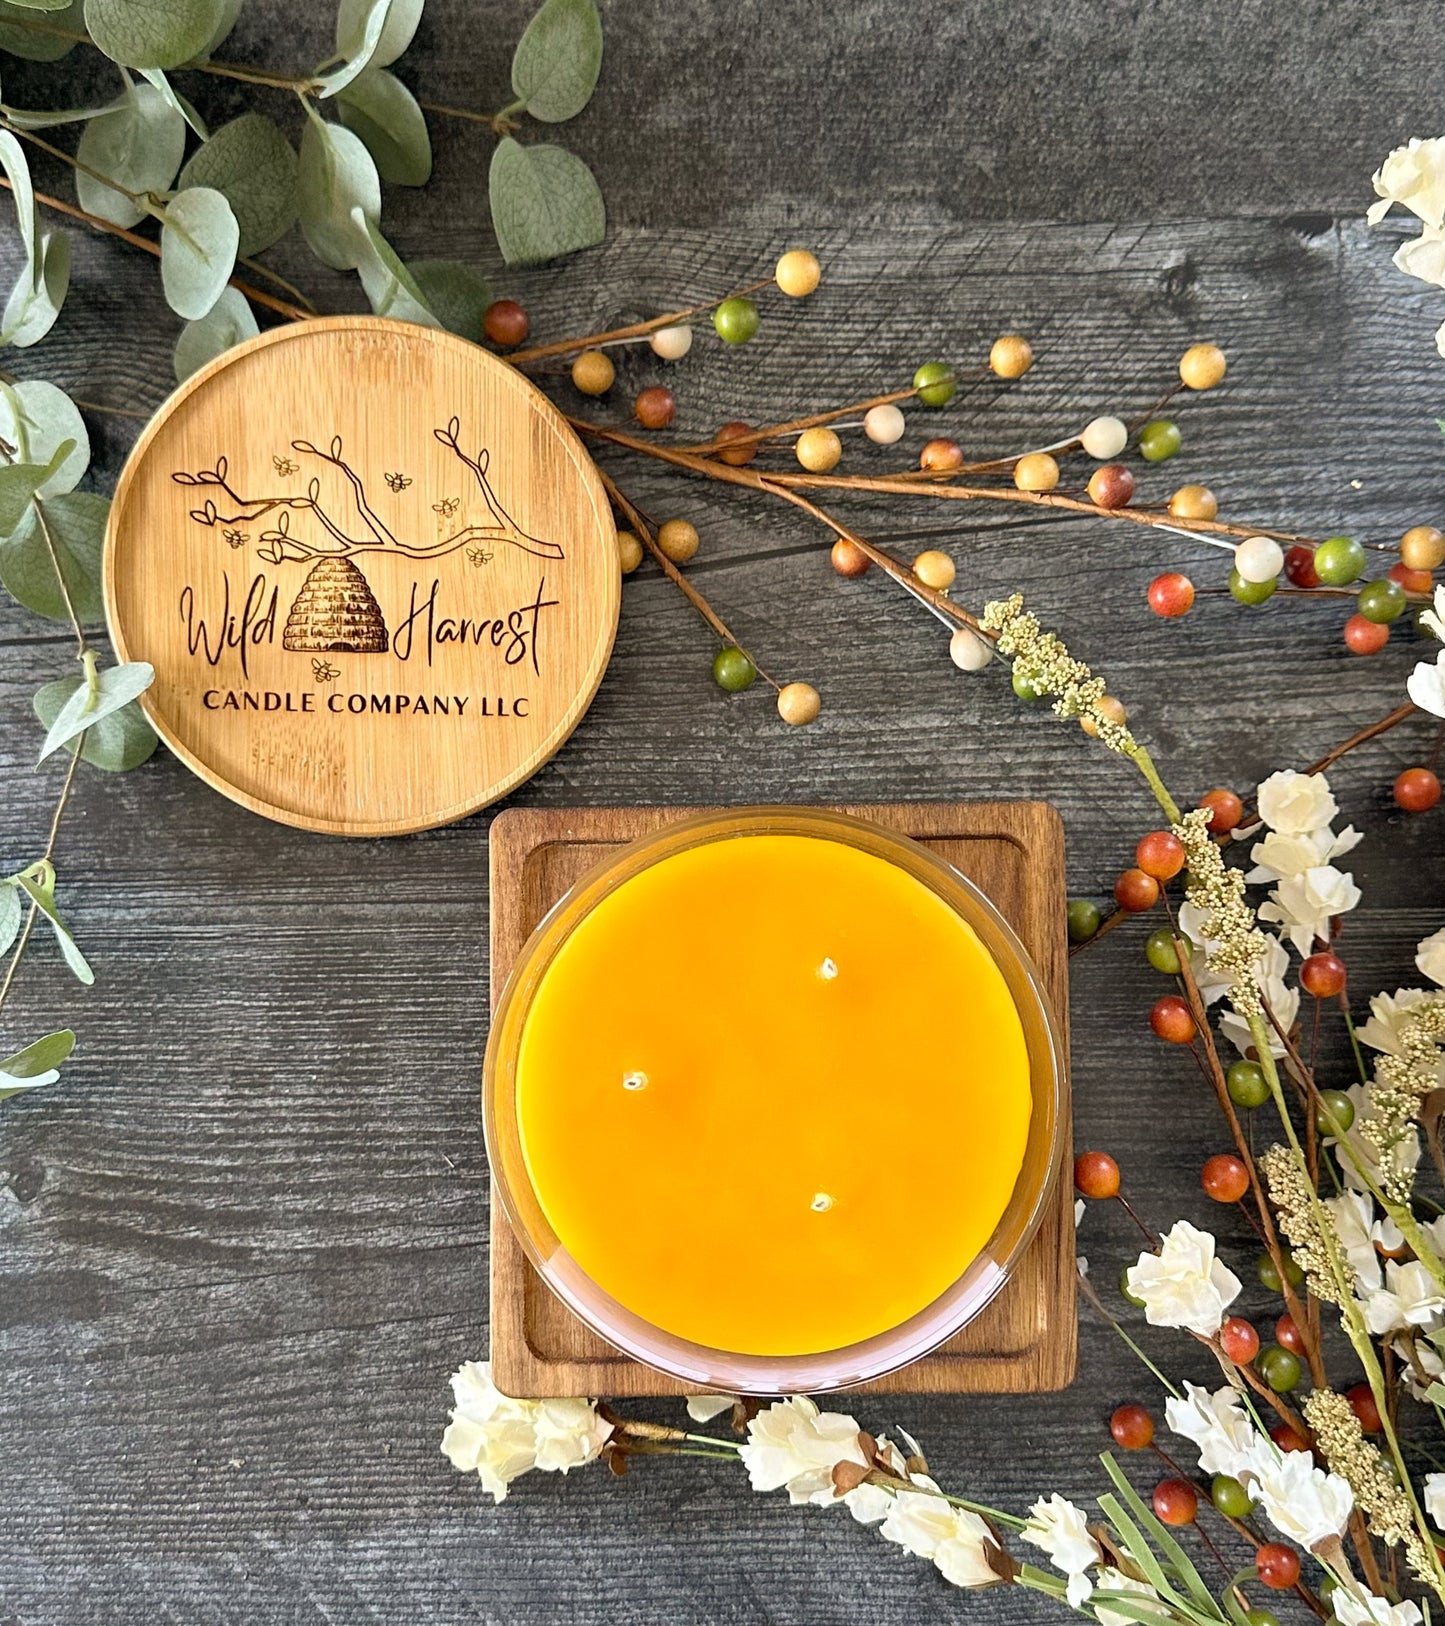 Scented Pure Beeswax Candles, 12 oz net wt - Choose Your Scent